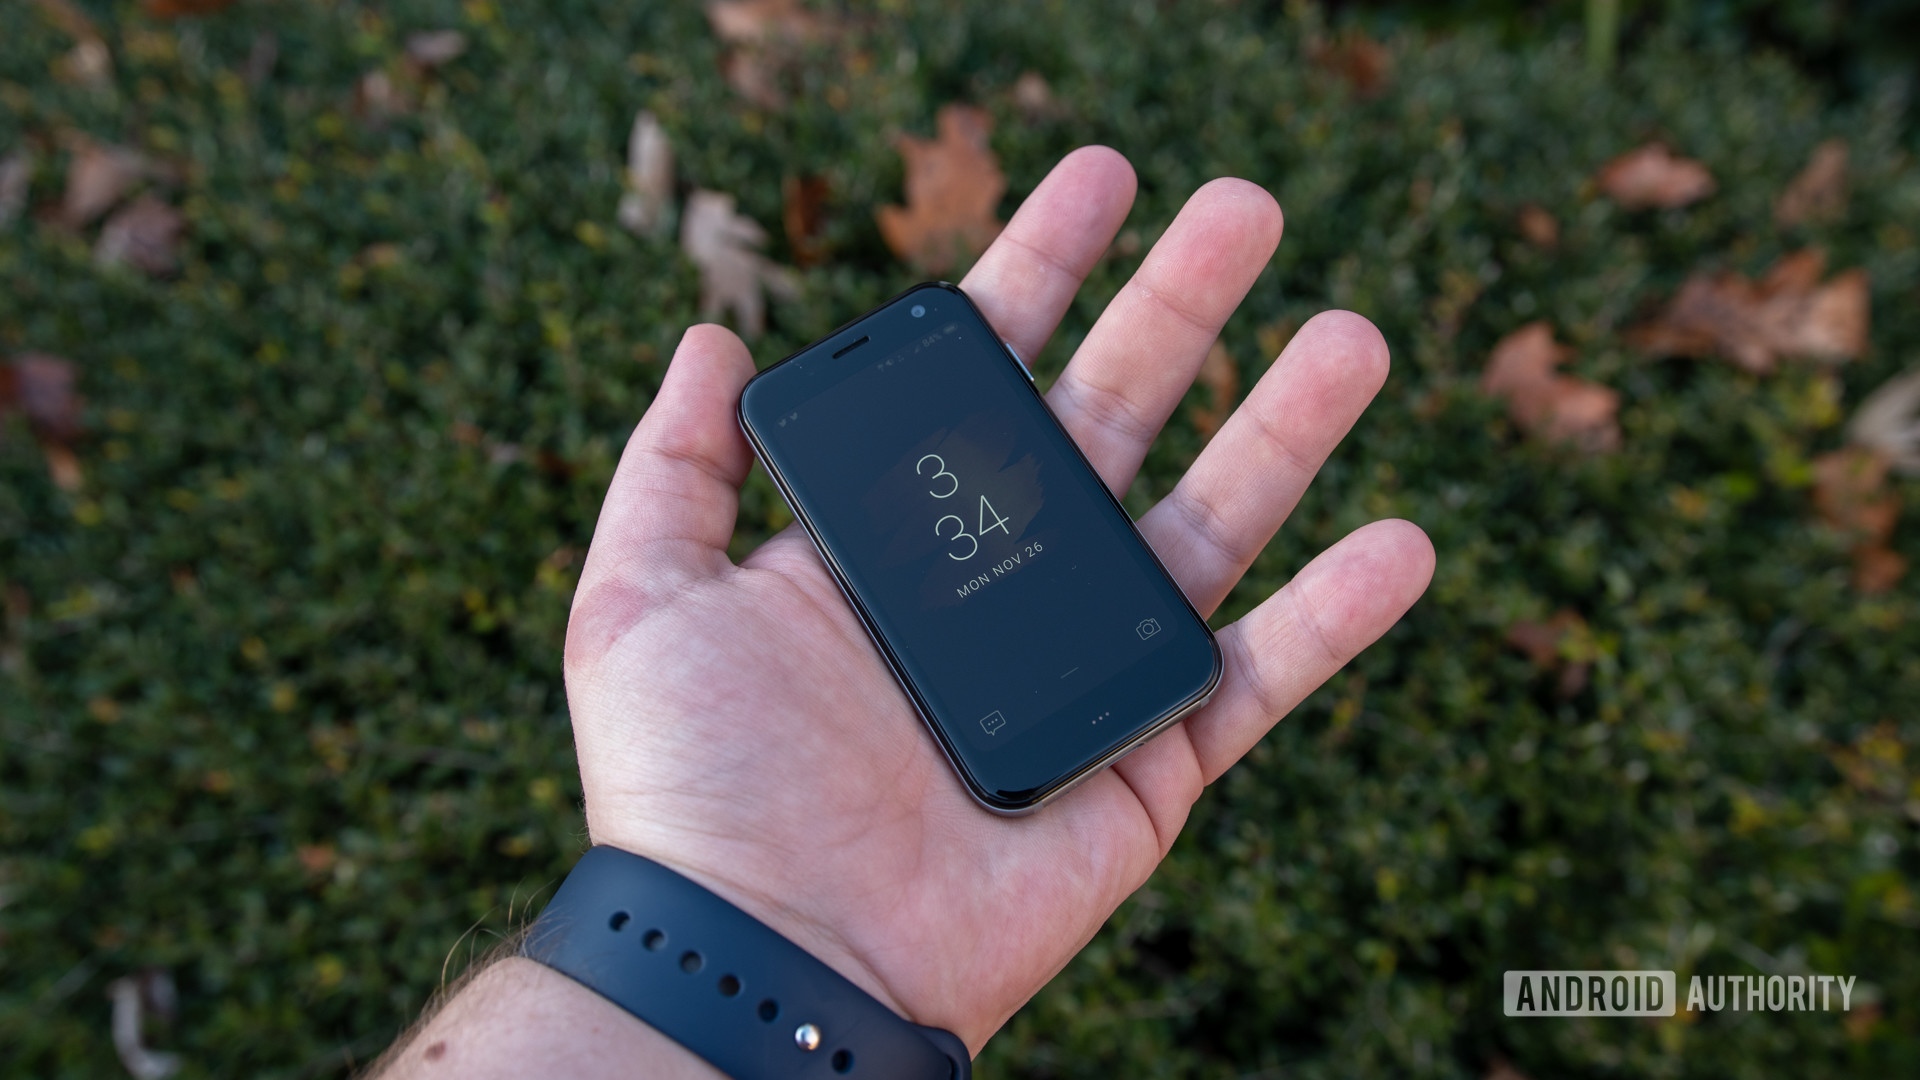 Palm Phone Review